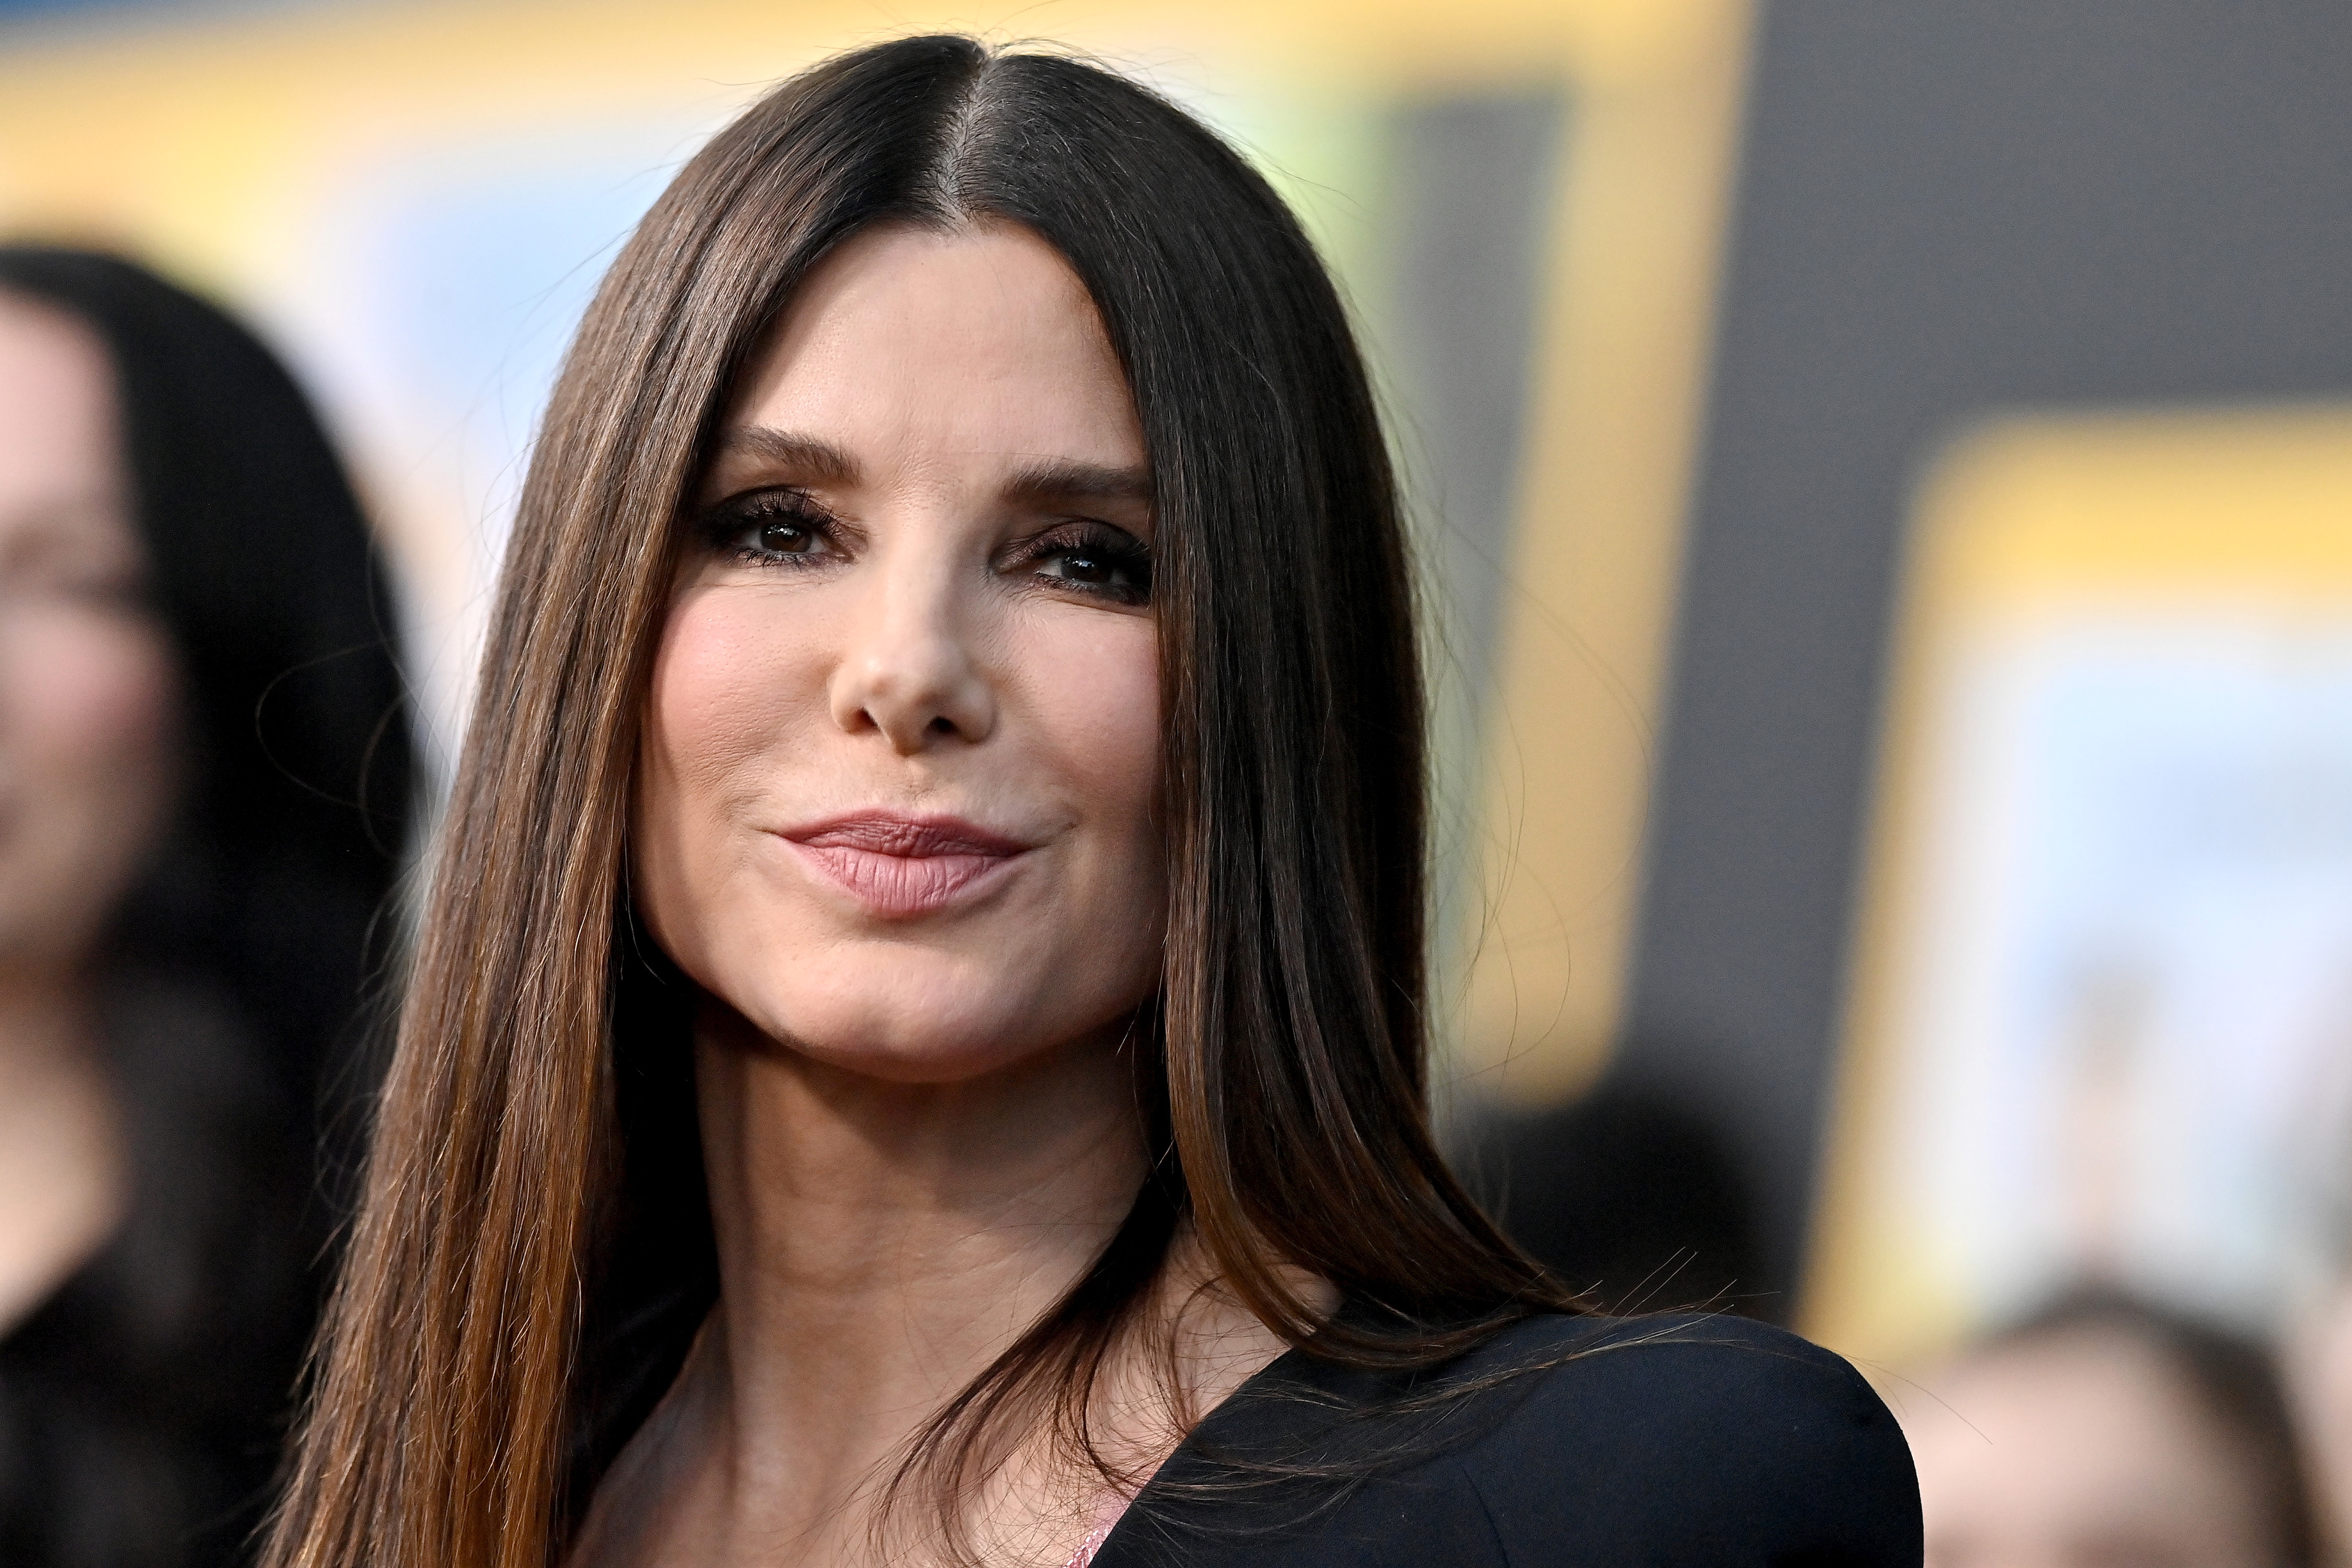 Sandra Bullock at the Los Angeles premiere of Paramount Pictures' "The Lost City" in 2022 | Source: Getty Images